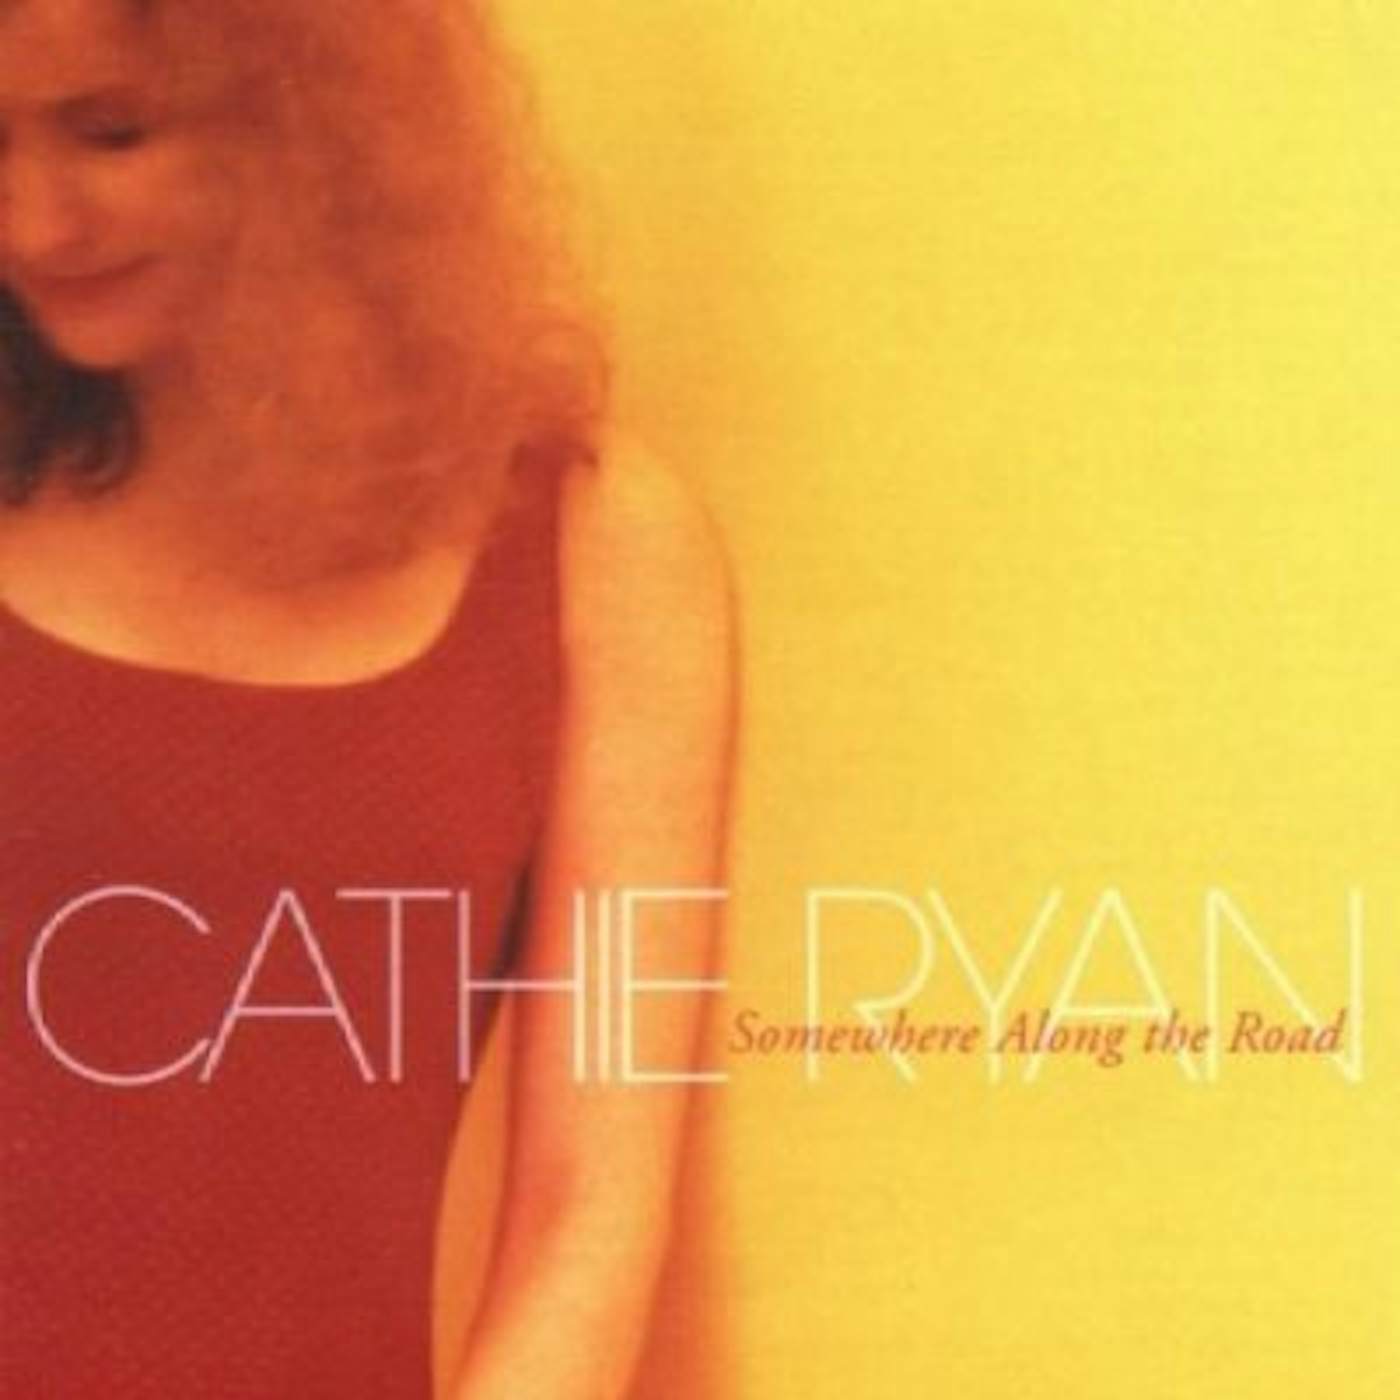 Cathie Ryan SOMEWHERE ALONG THE ROAD CD